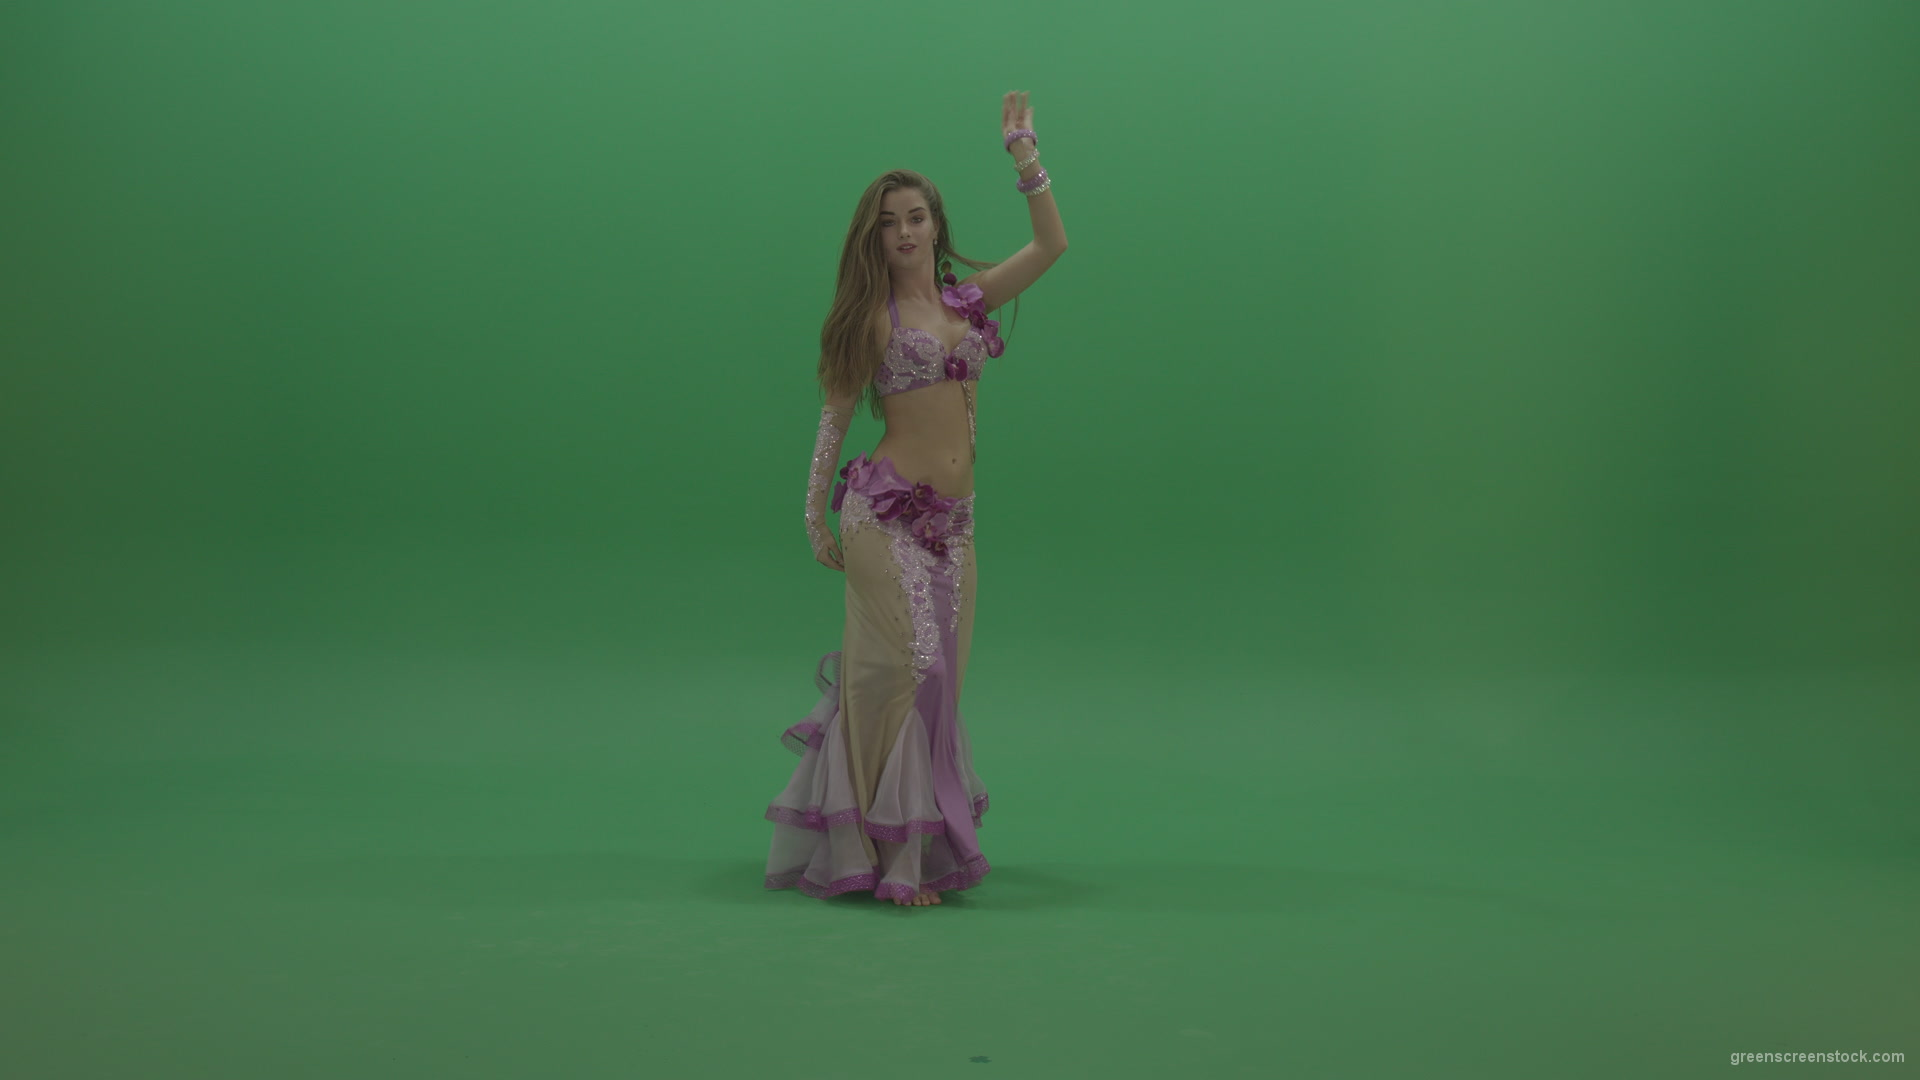 Beautiful-belly-dancer-display-amazing-dance-moves-over-chromakey-background_009 Green Screen Stock